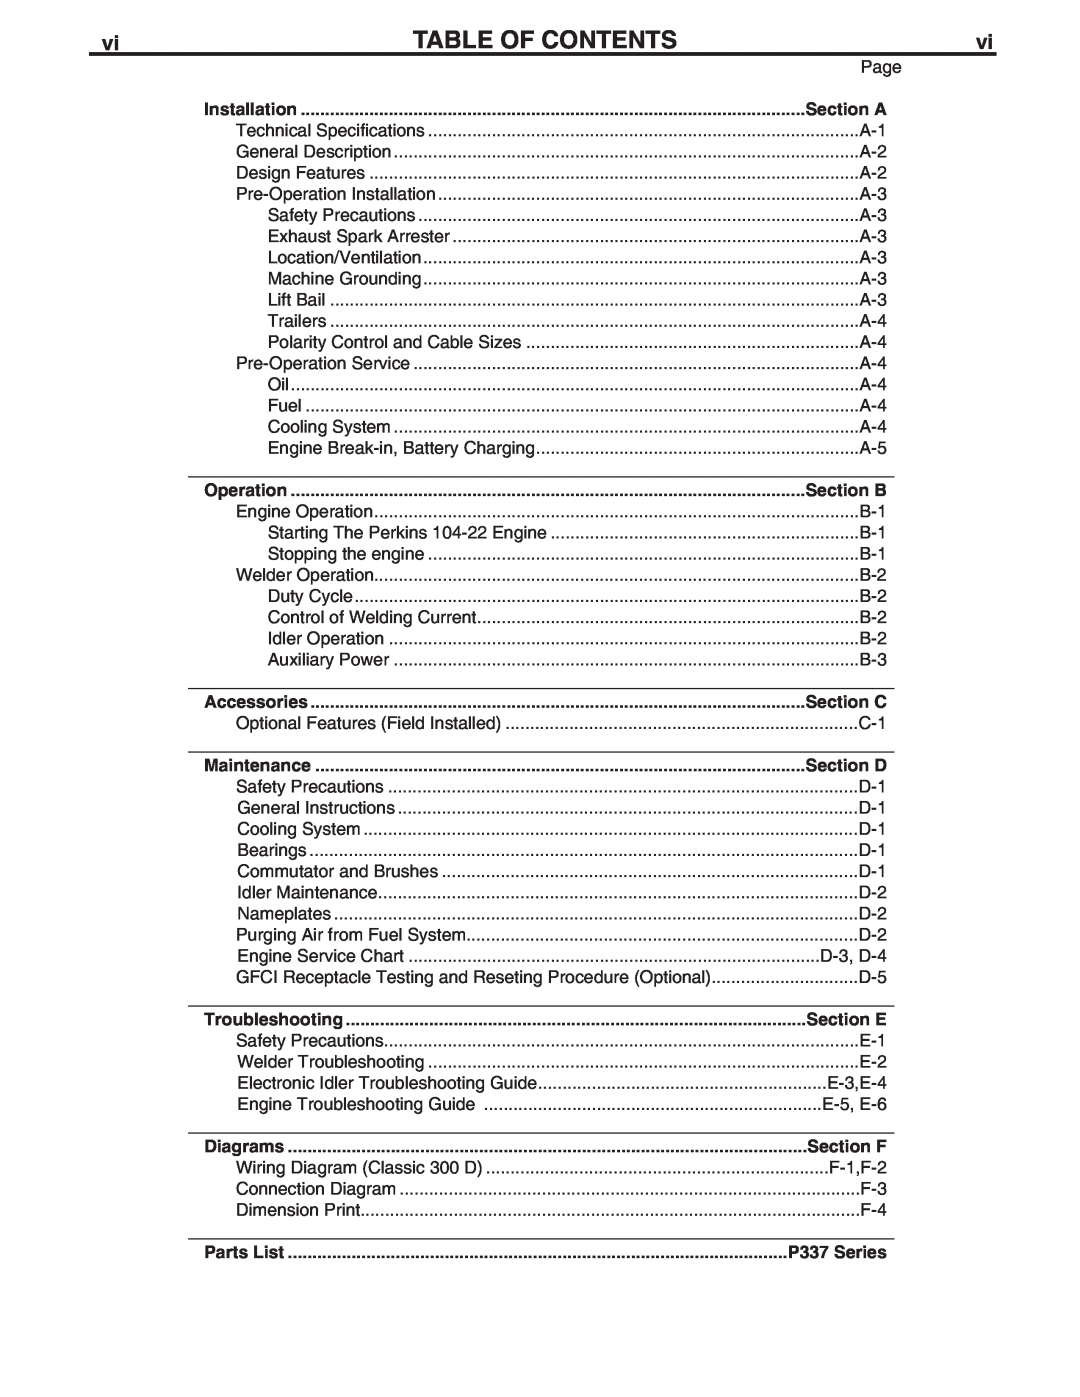 Lincoln Electric 300 D Table Of Contents, Section A, Section B, Section C, Section D, Section E, Section F, P337 Series 